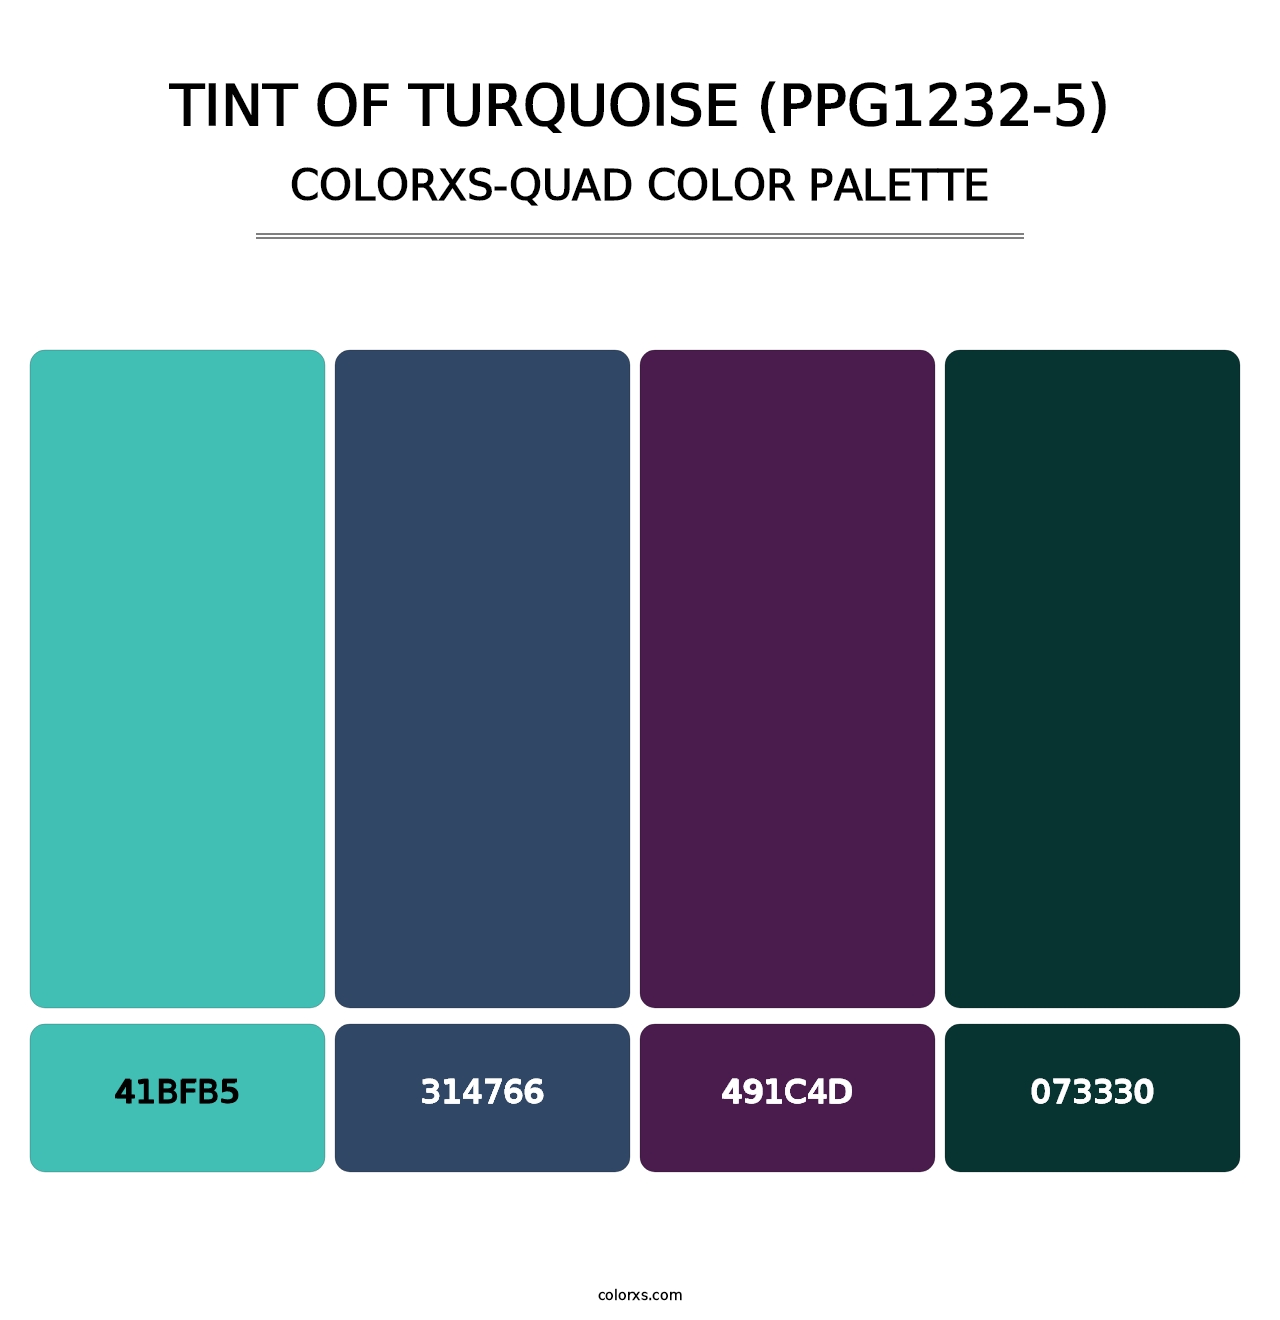 Tint Of Turquoise (PPG1232-5) - Colorxs Quad Palette